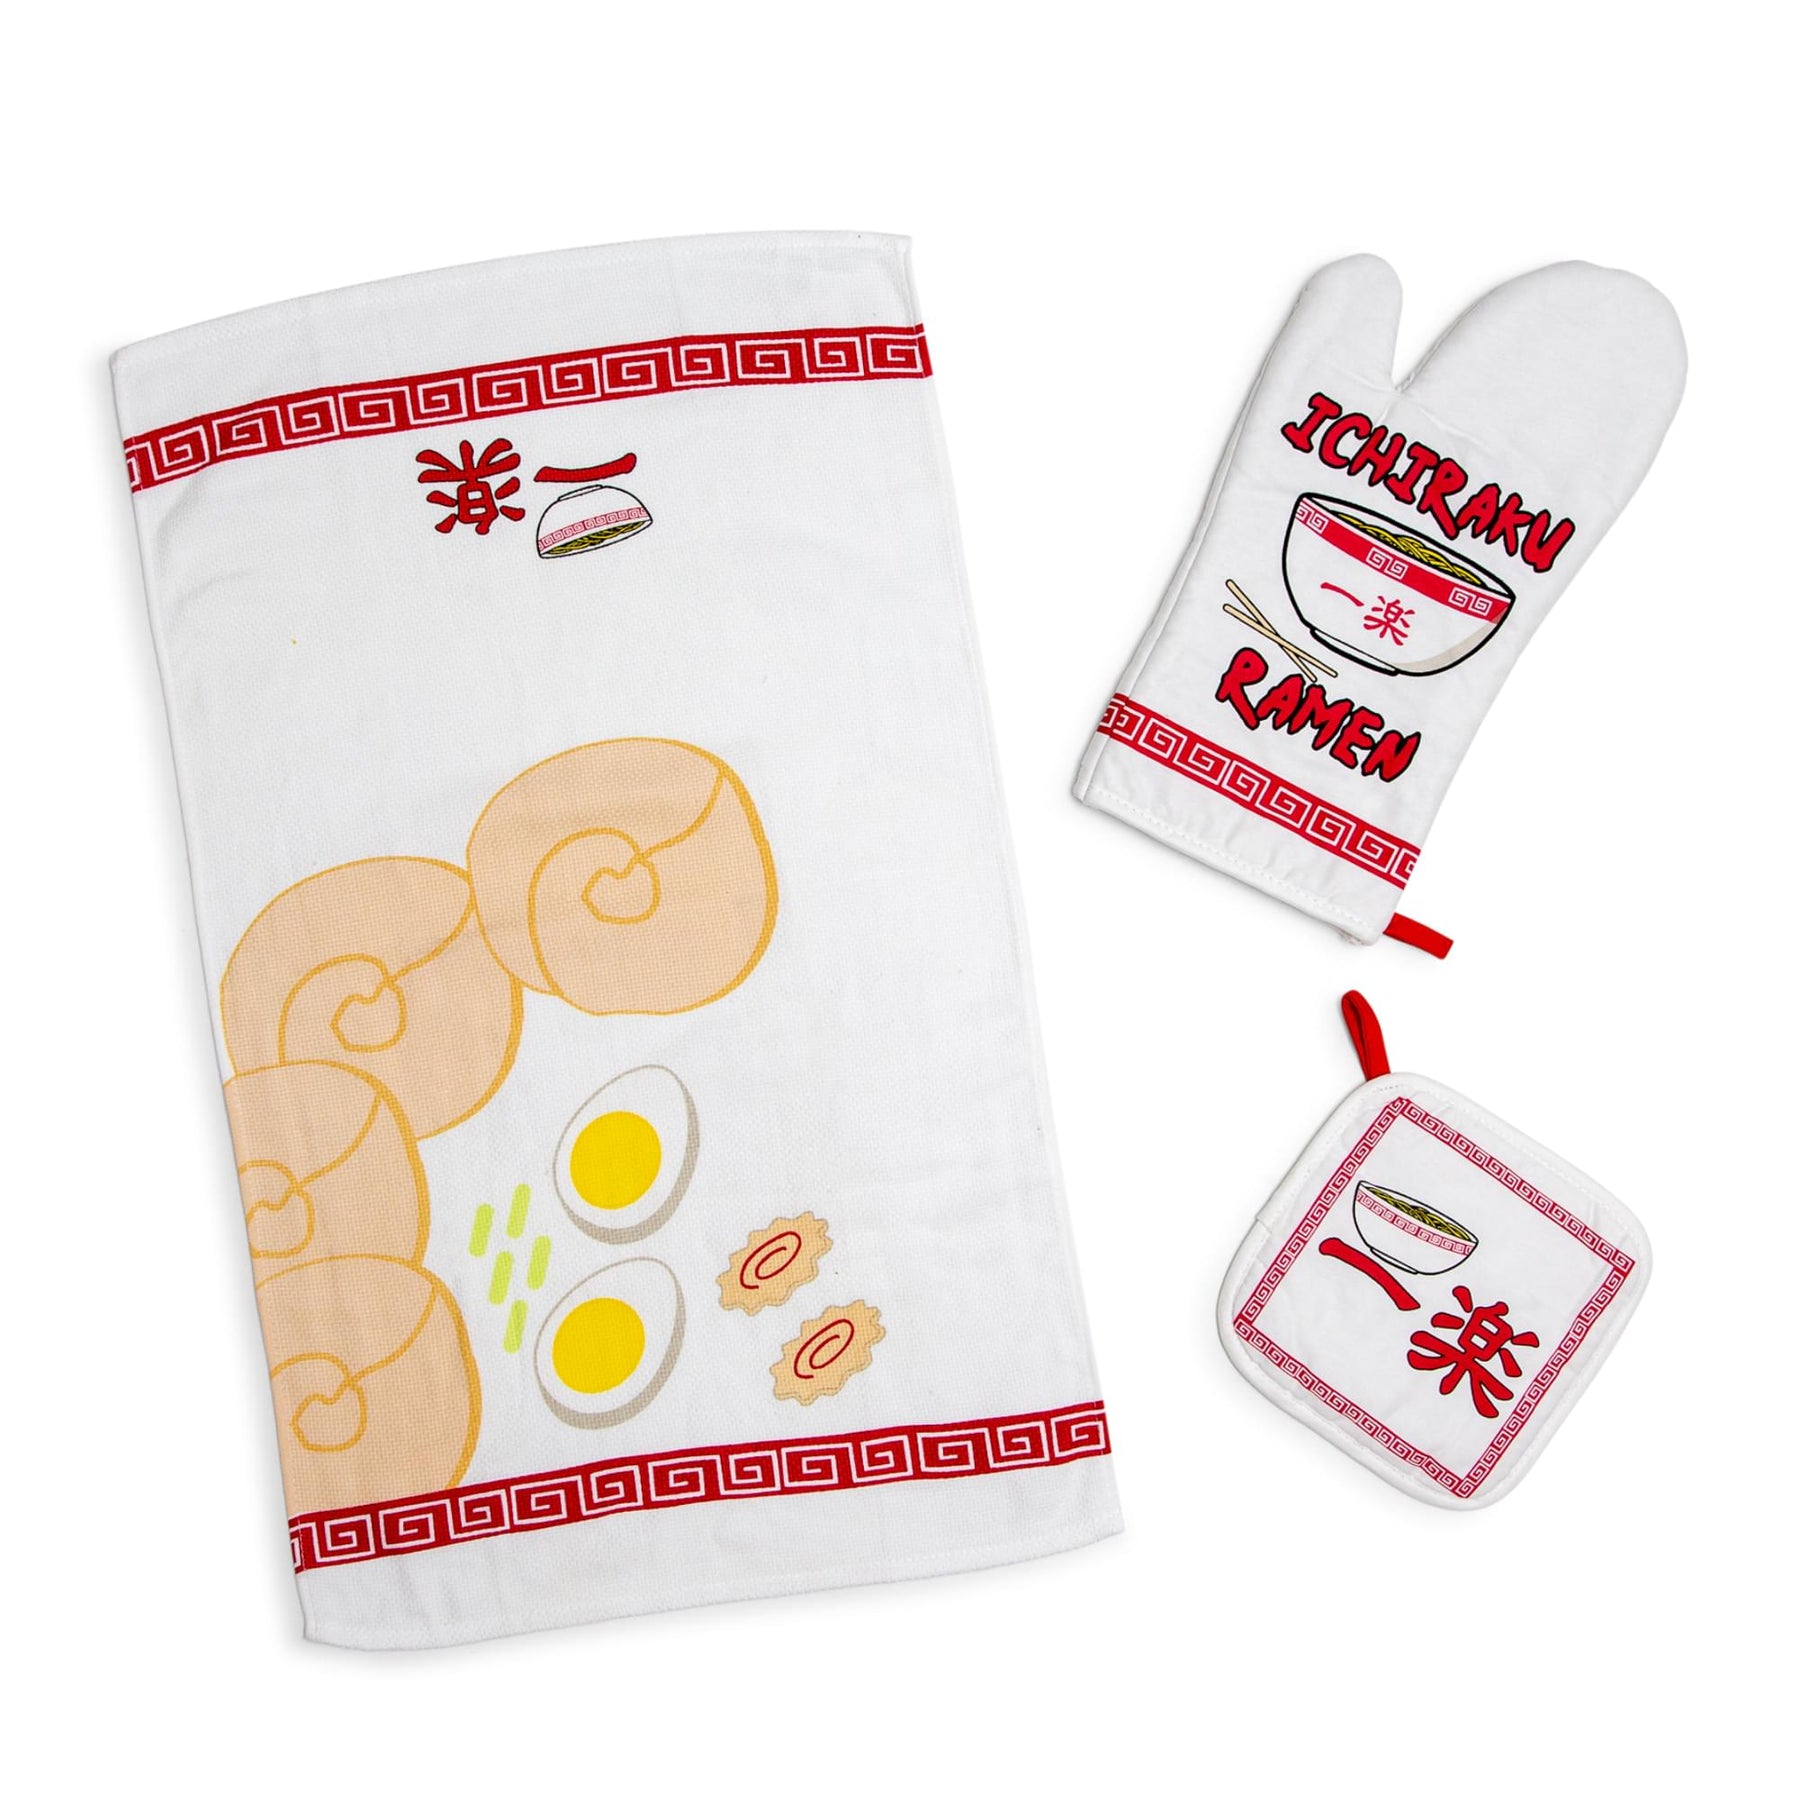 Hello Kitty Heat Resistant Cooking Glove Oven Mitts + Placemat Pot Holder  Set Inspired by You.